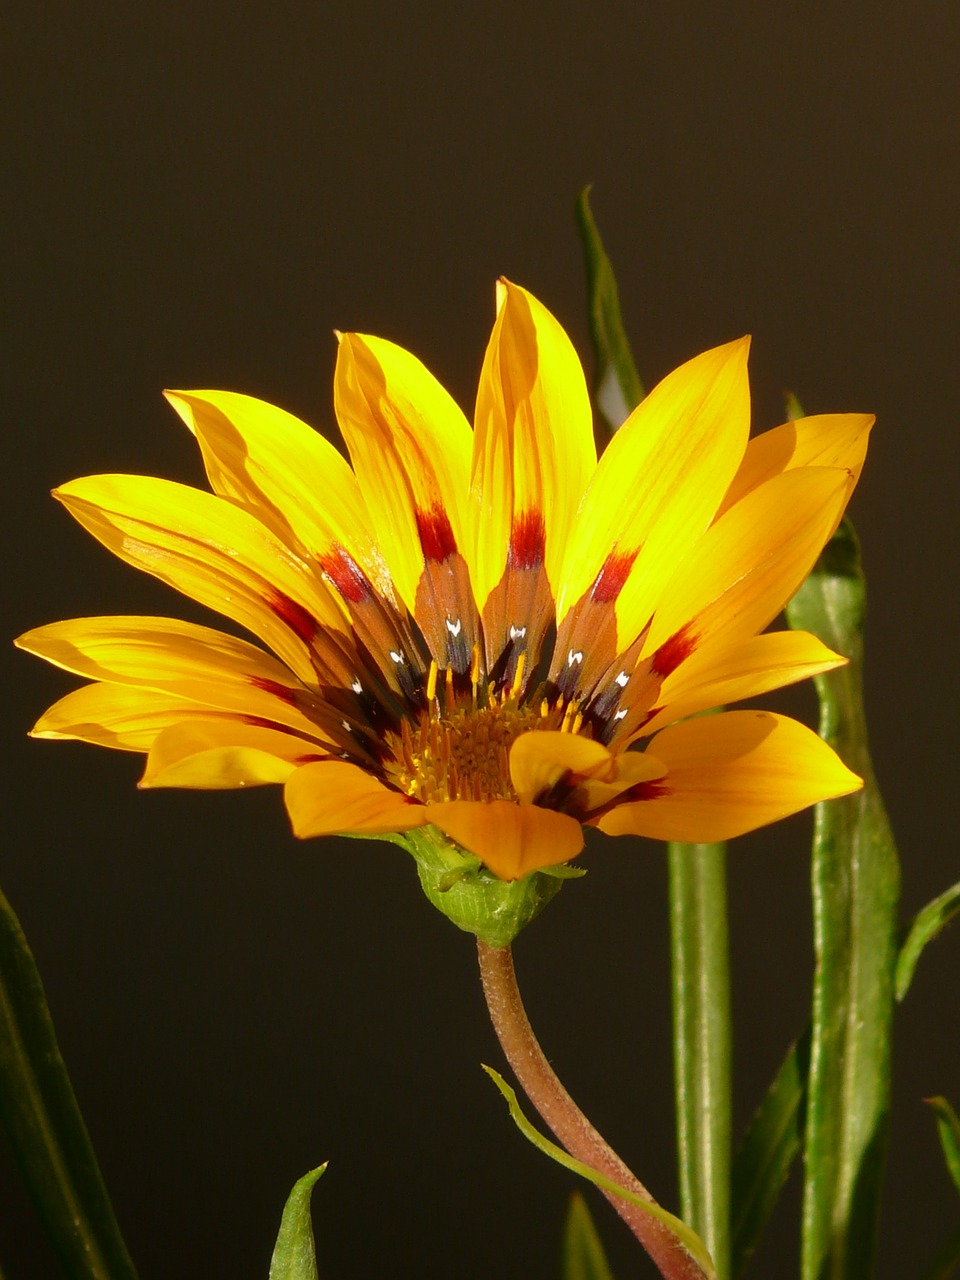 gold noon,gazanie,noon gold flower,sonnentaler,flora,yellow,blossom,bloom,plant,sunny,sunny yellow,bright,gazania splendens,free pictures, free photos, free images, royalty free, free illustrations, public domain